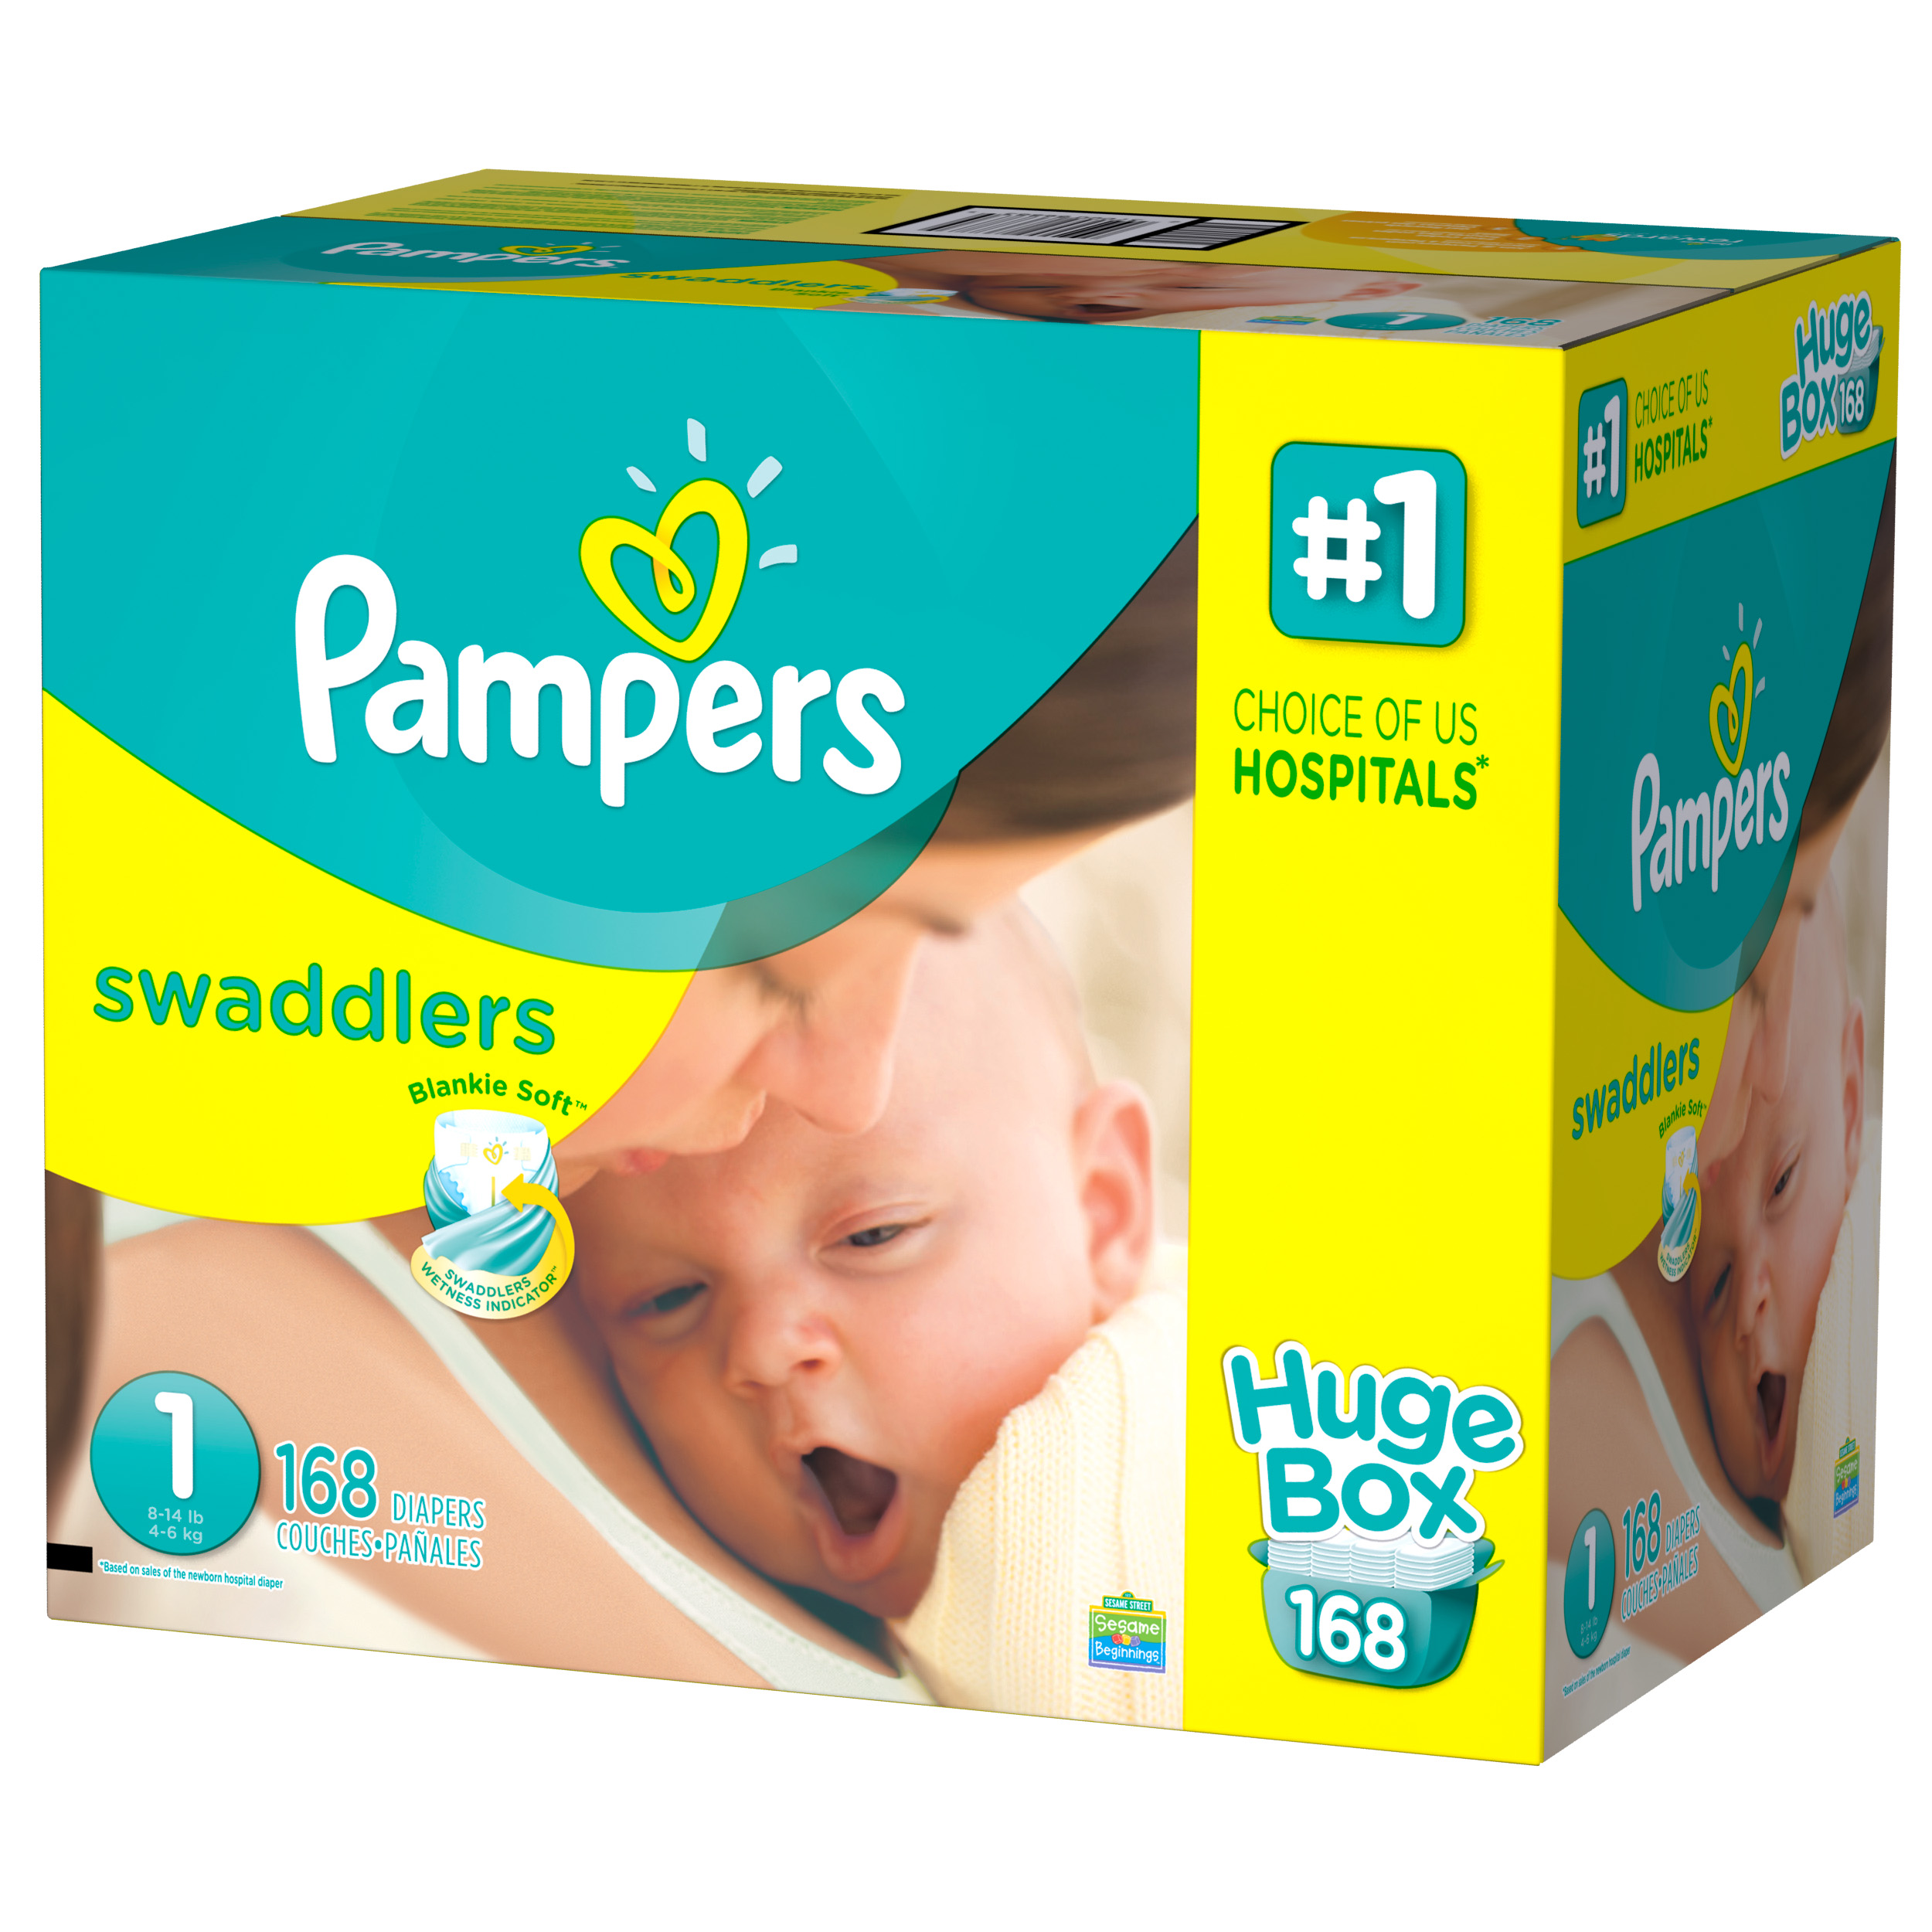 Pampers Swaddlers Soft and Absorbent Newborn Diapers, Size 1, 168 Ct - image 3 of 10